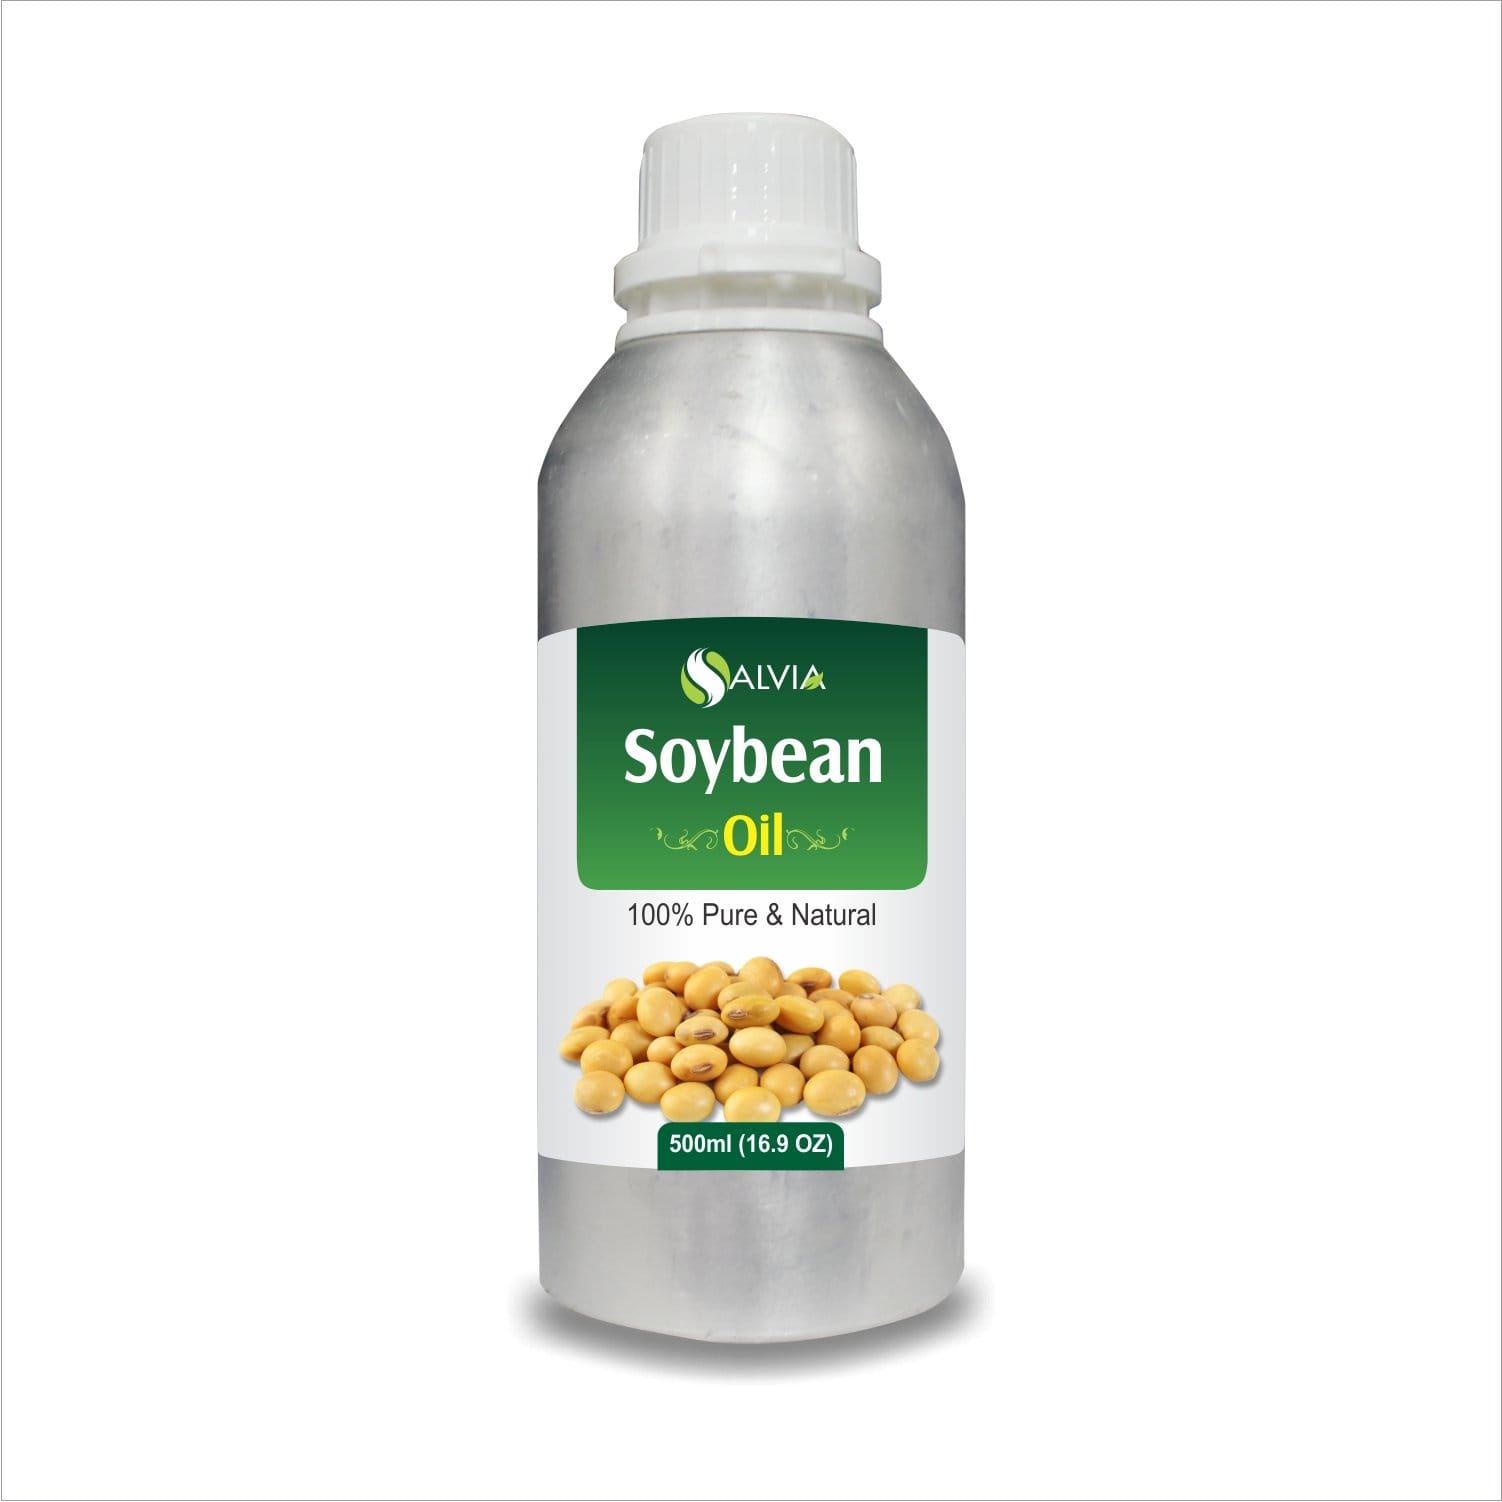 Salvia Natural Carrier Oils 500ml Soybean Oil (Glycine Max) 100% Natural Carrier Oil, Moisturizes The Skin, Solves Itchy Scalp, Antioxidant & Rich in Vitamin E, Best For Aromatherapy